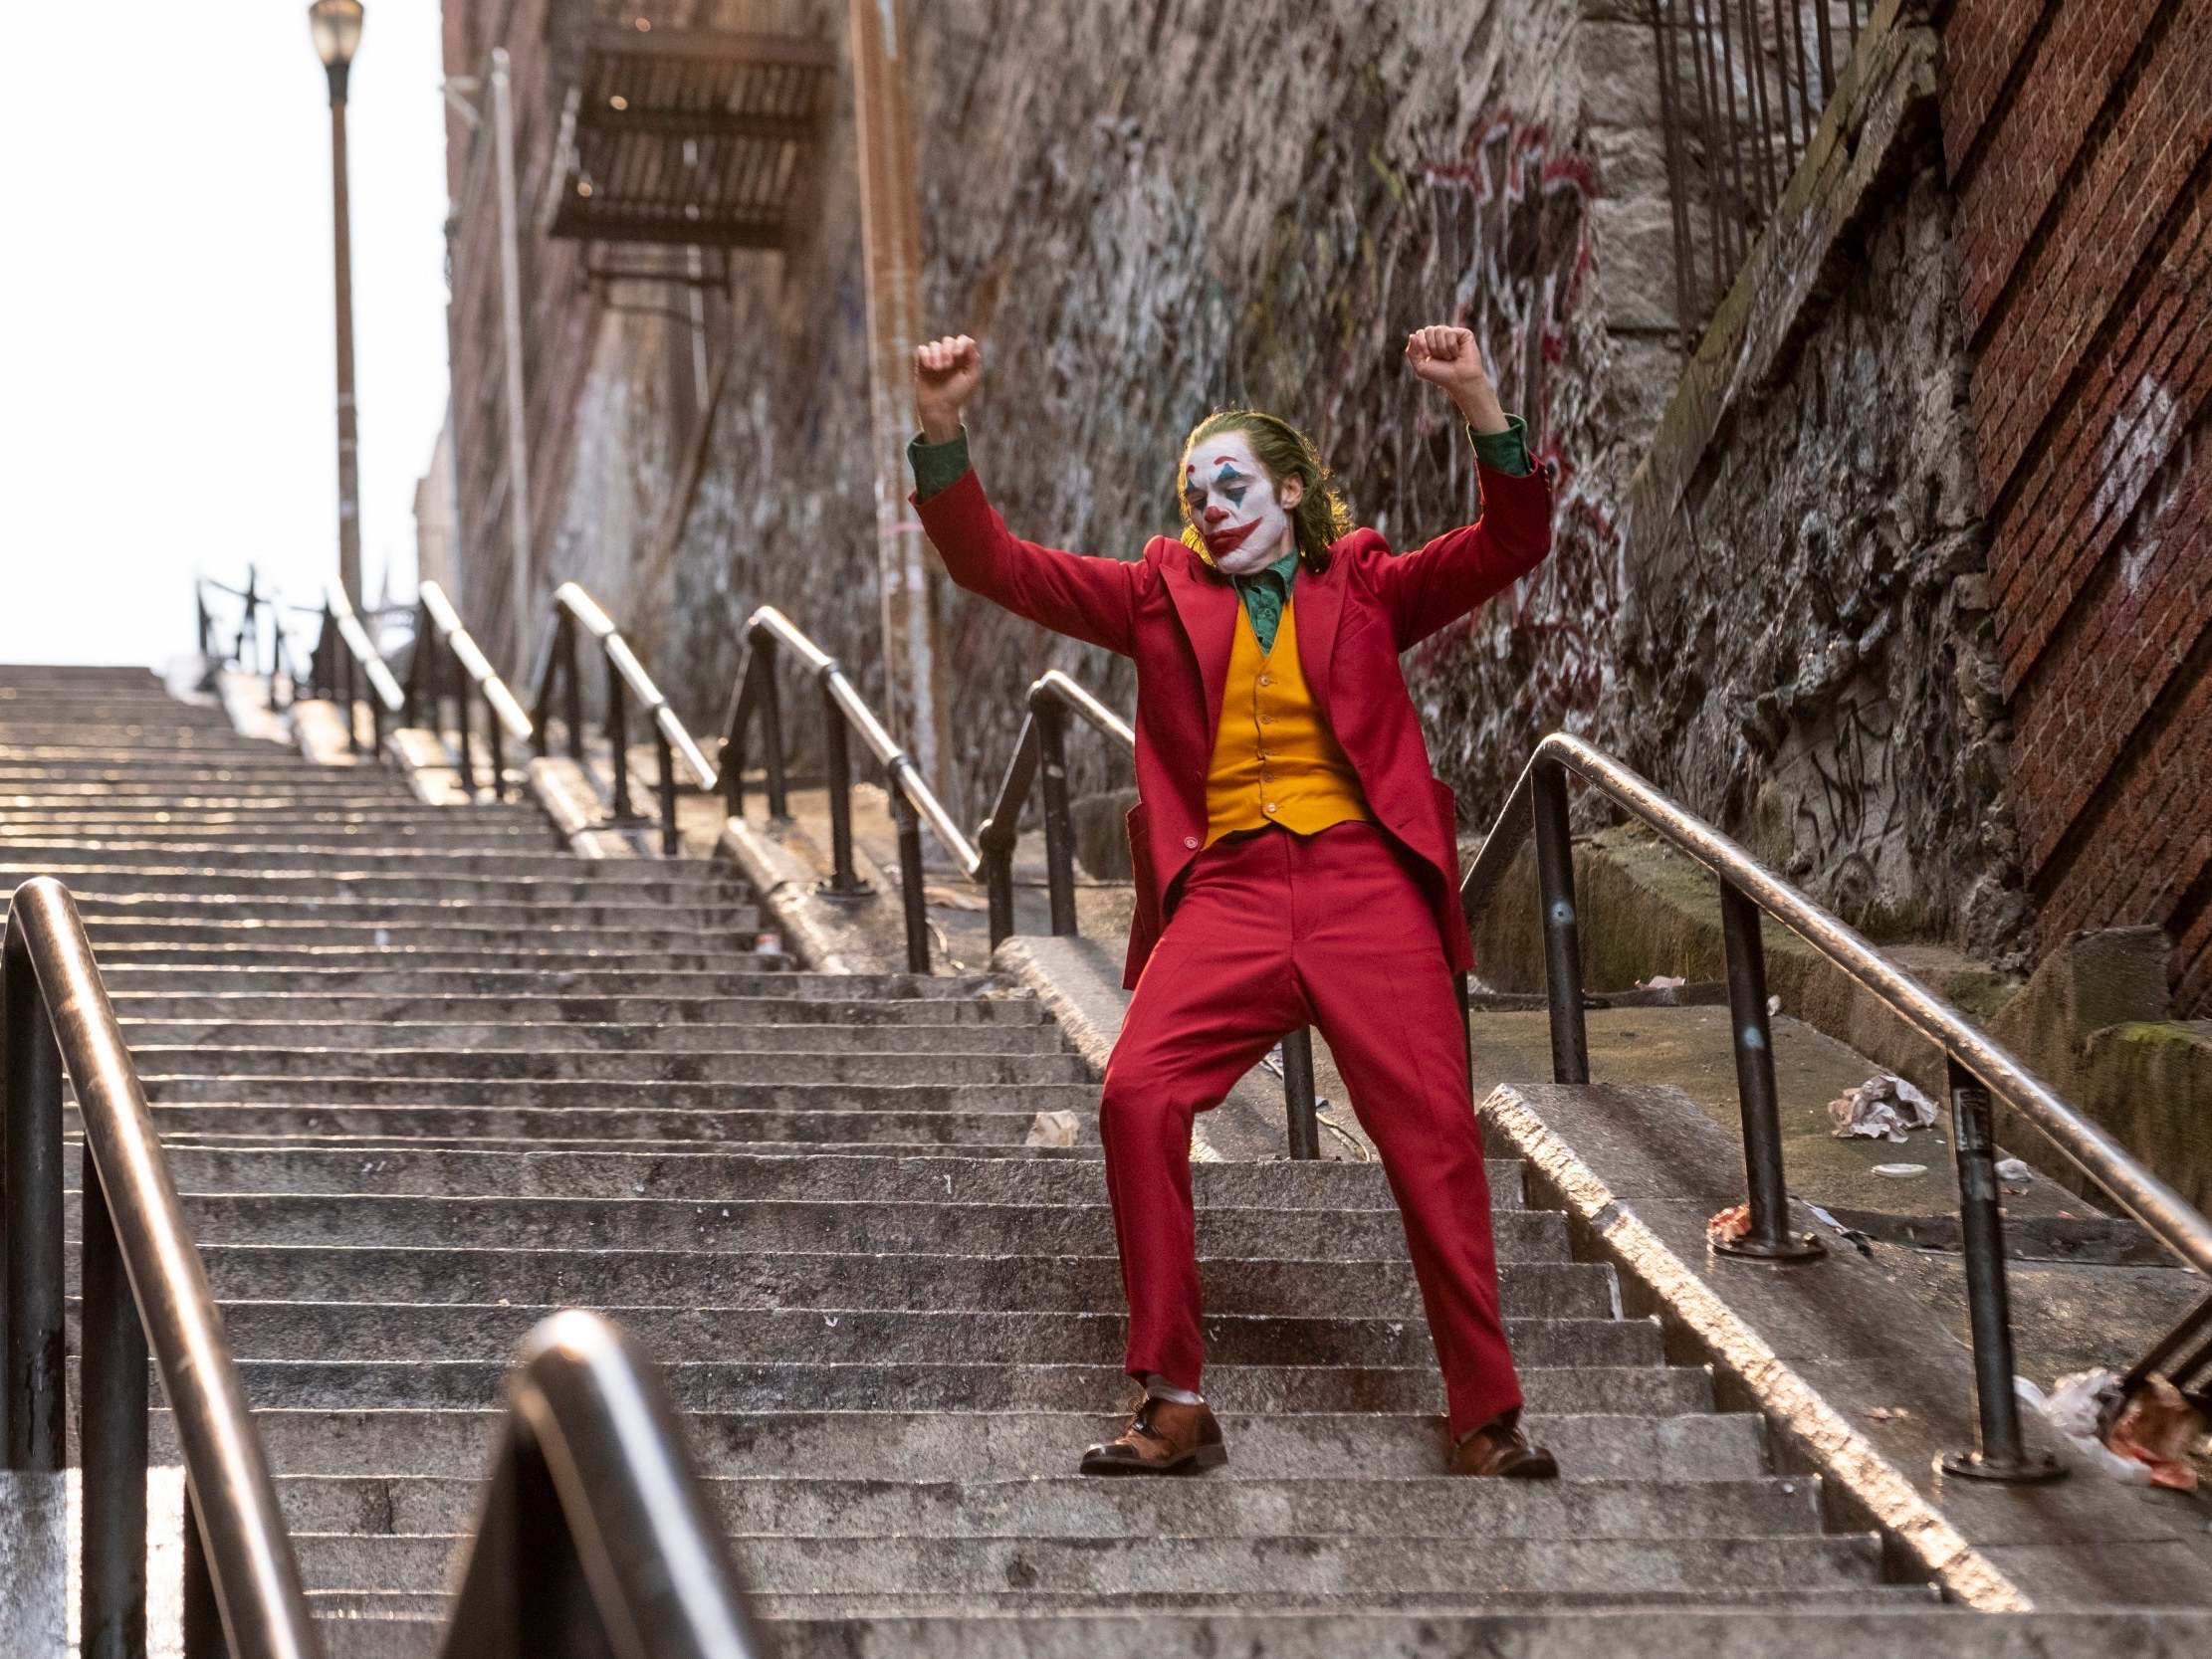 Tourists flock to see Joker stairs in New York City The Independent The Independent